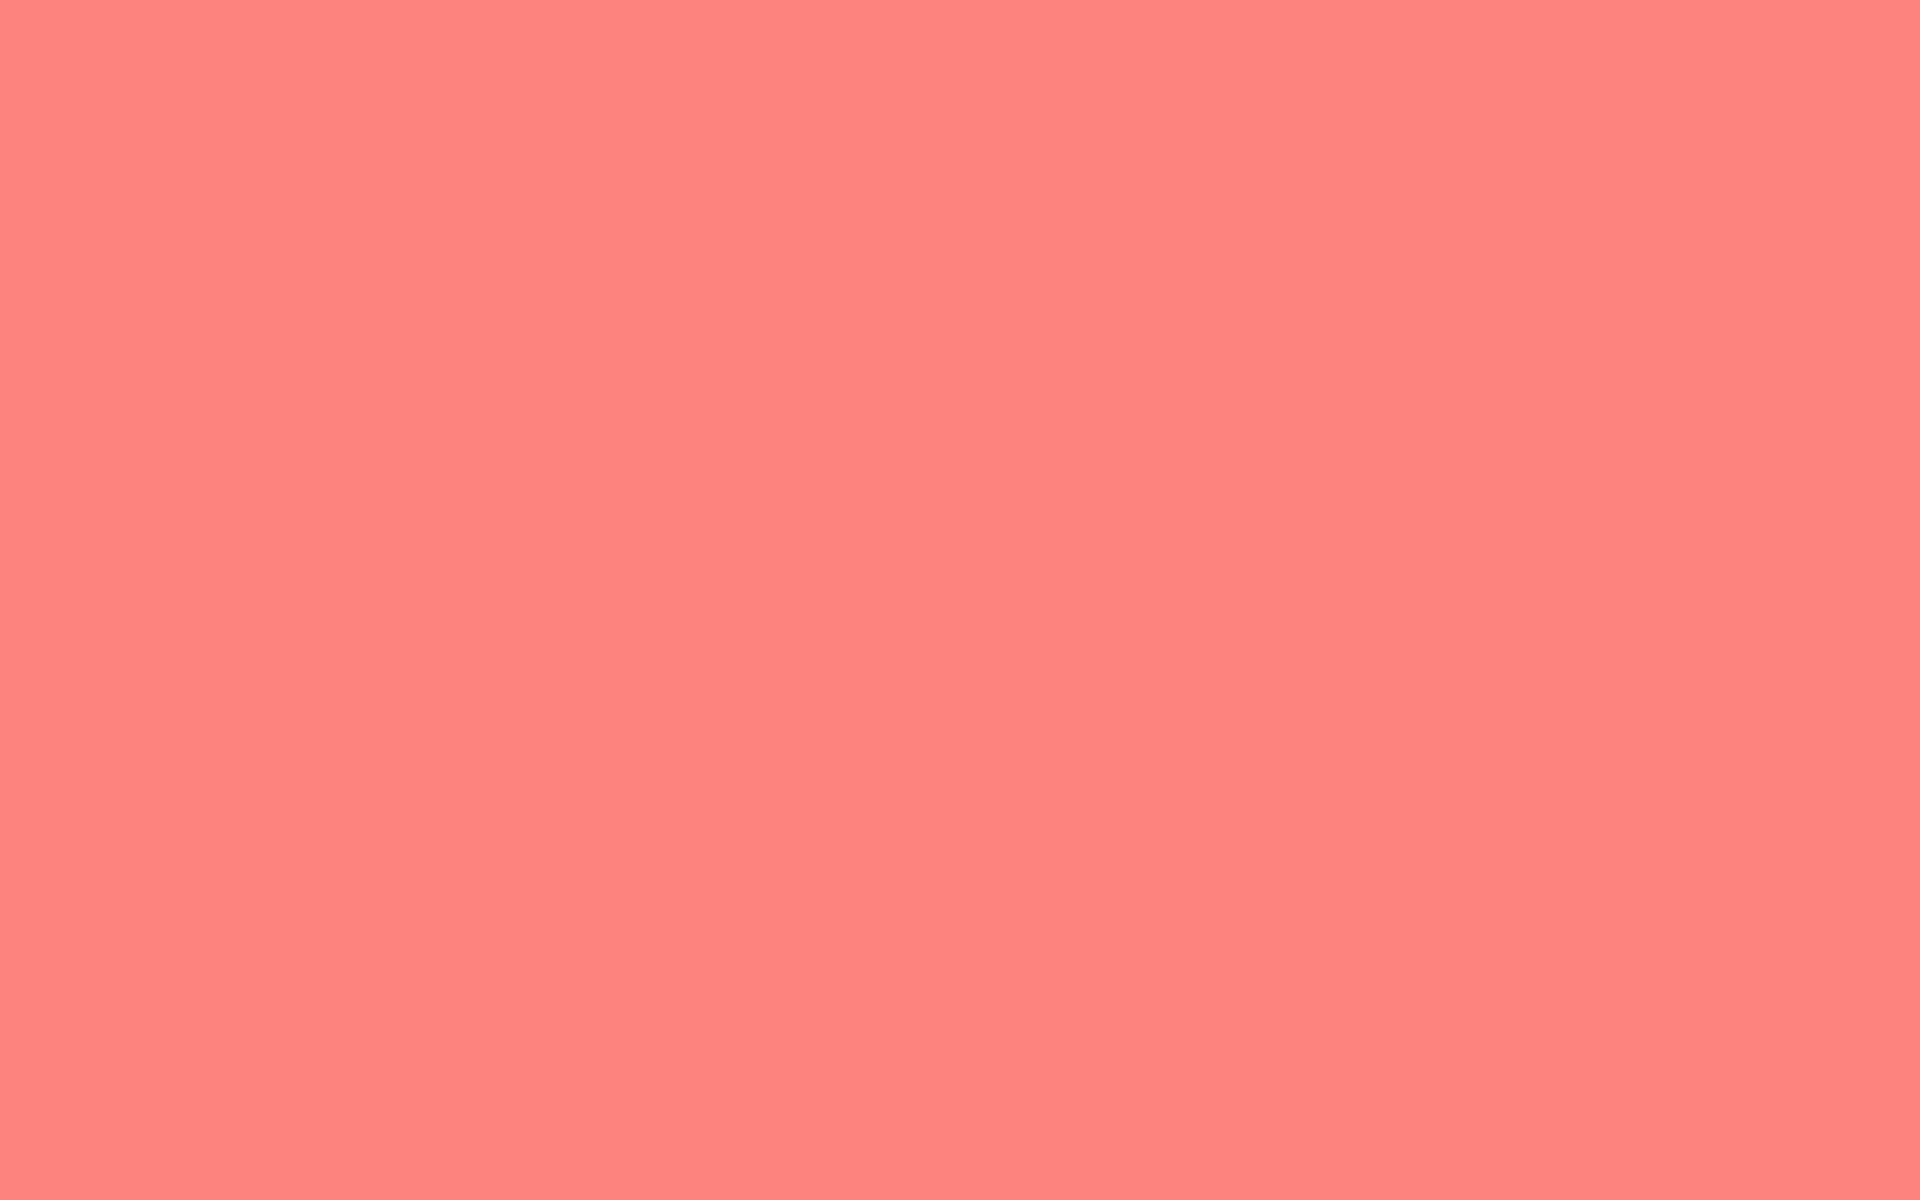 "A bright coral background"